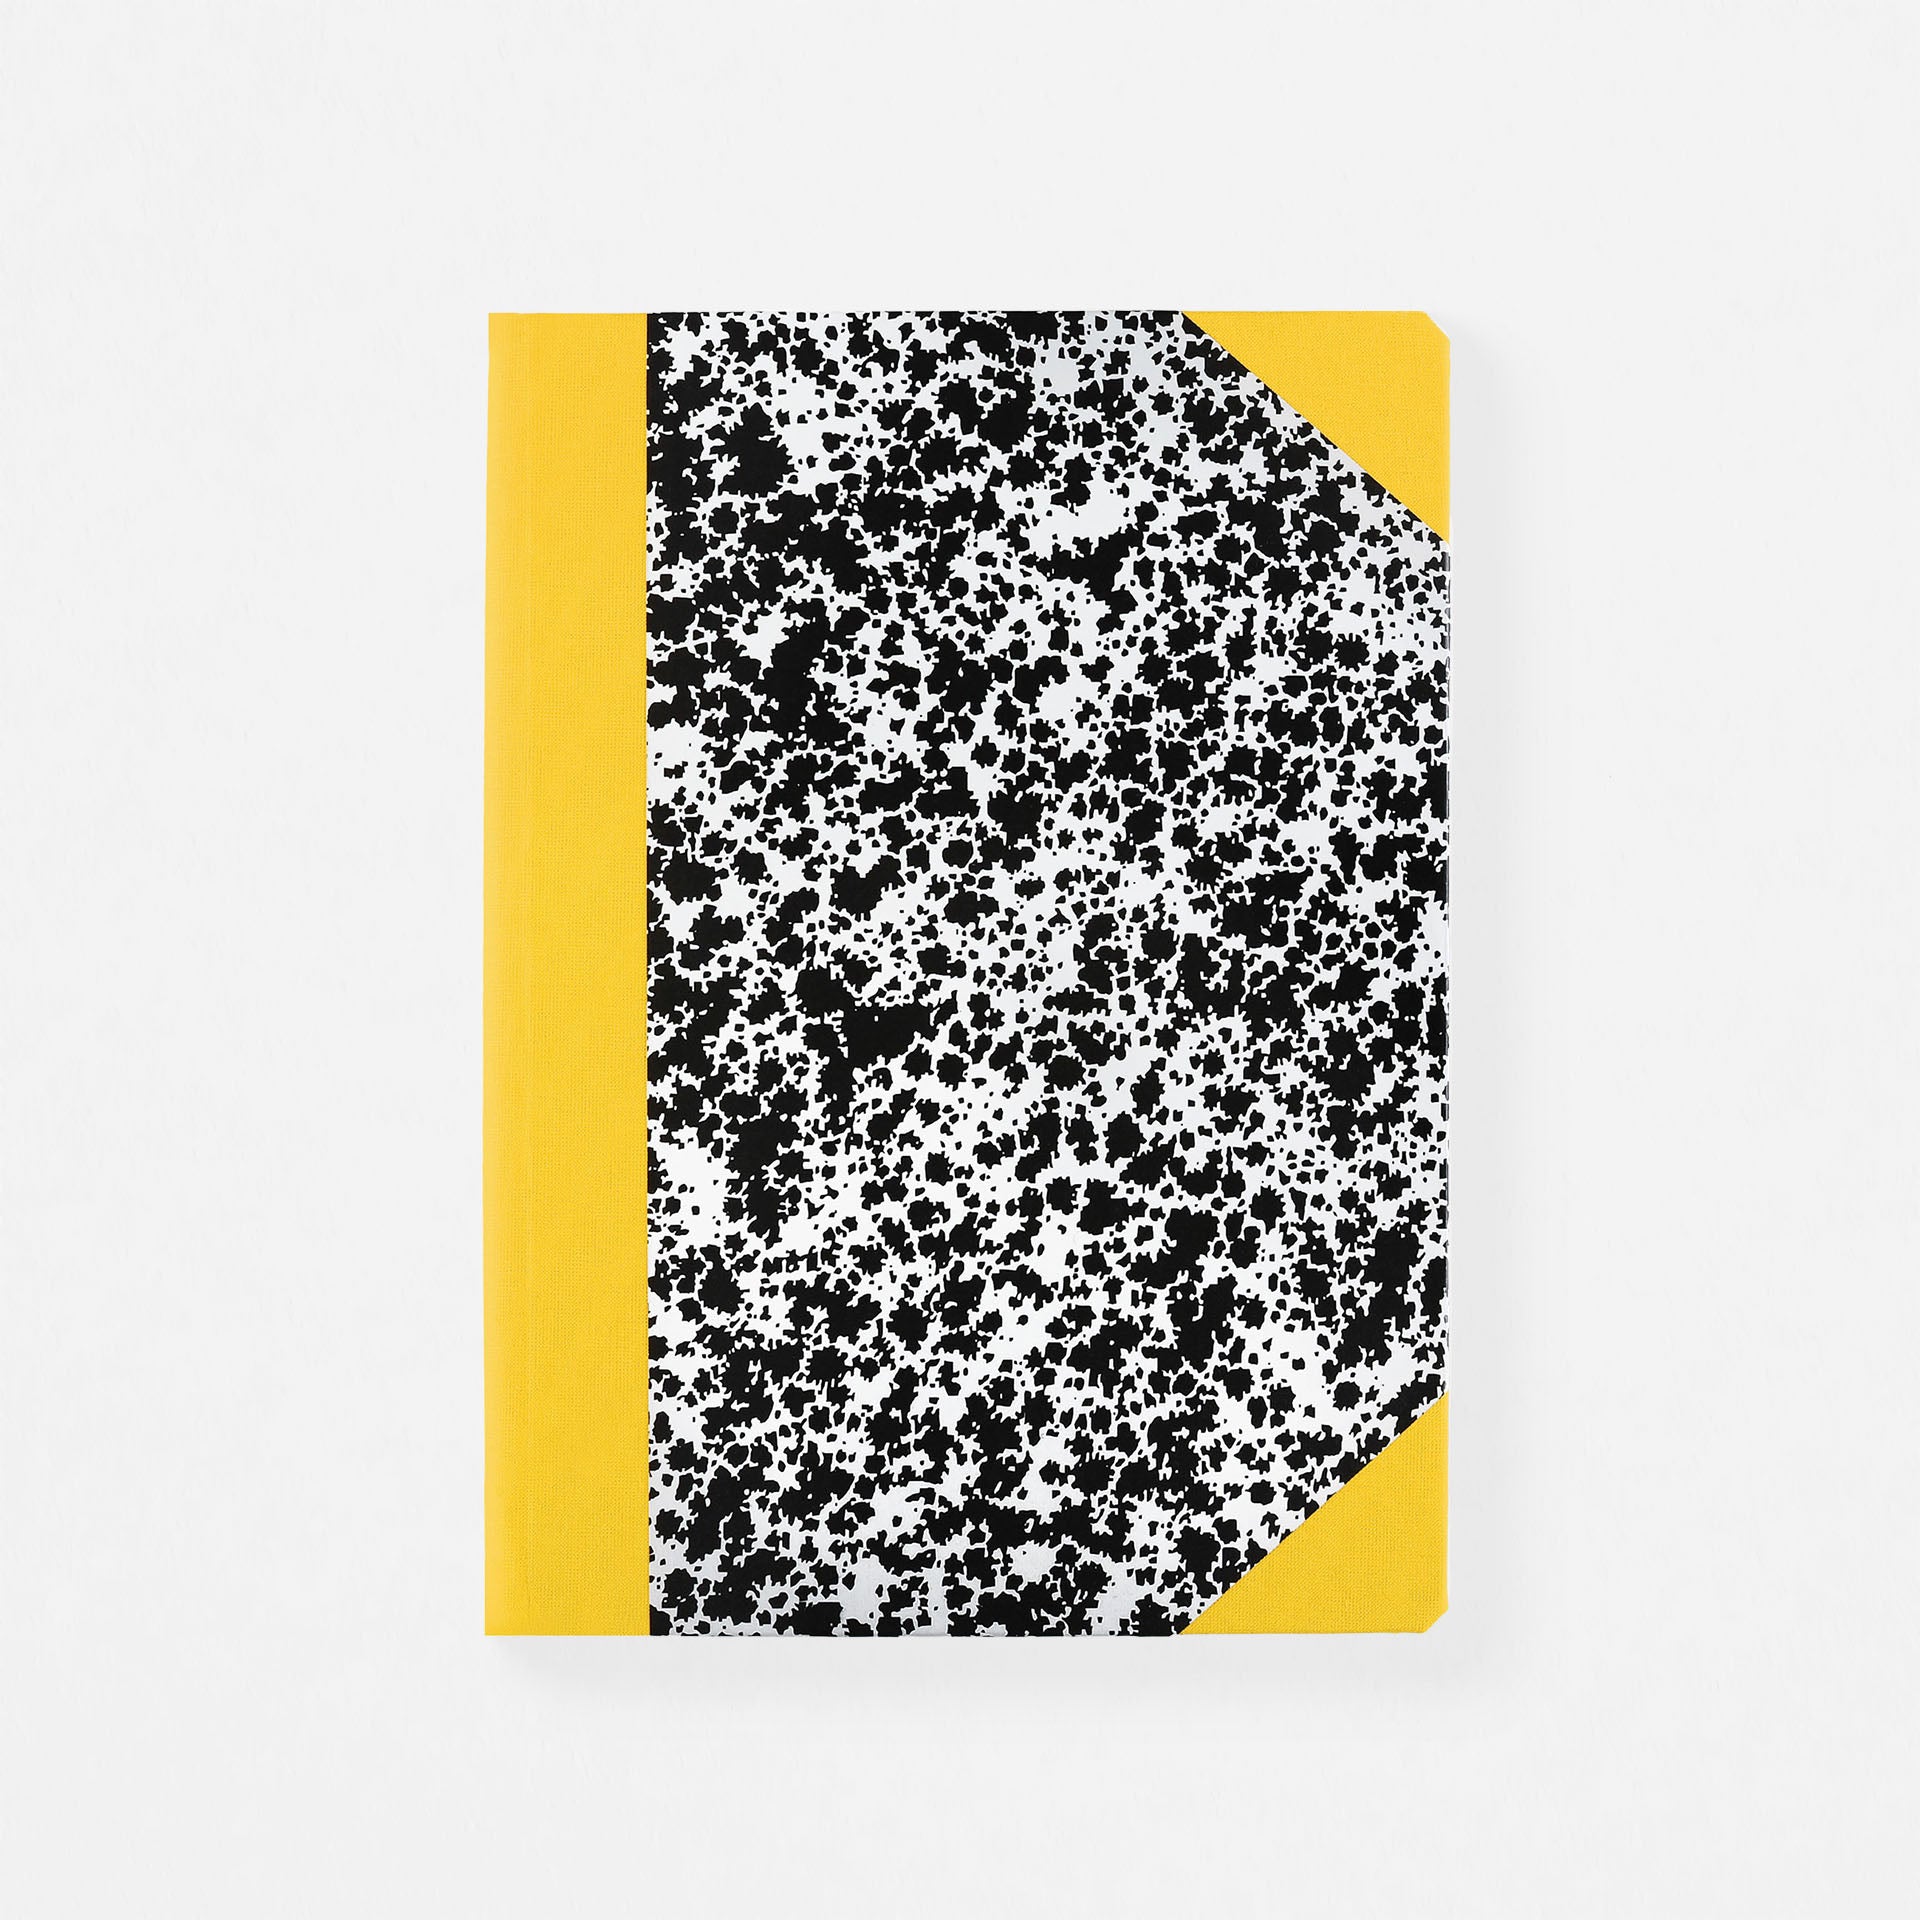 Emilio Braga Cloud Print Notebook Black, White & Yellow A5 | Lined Or Grid 